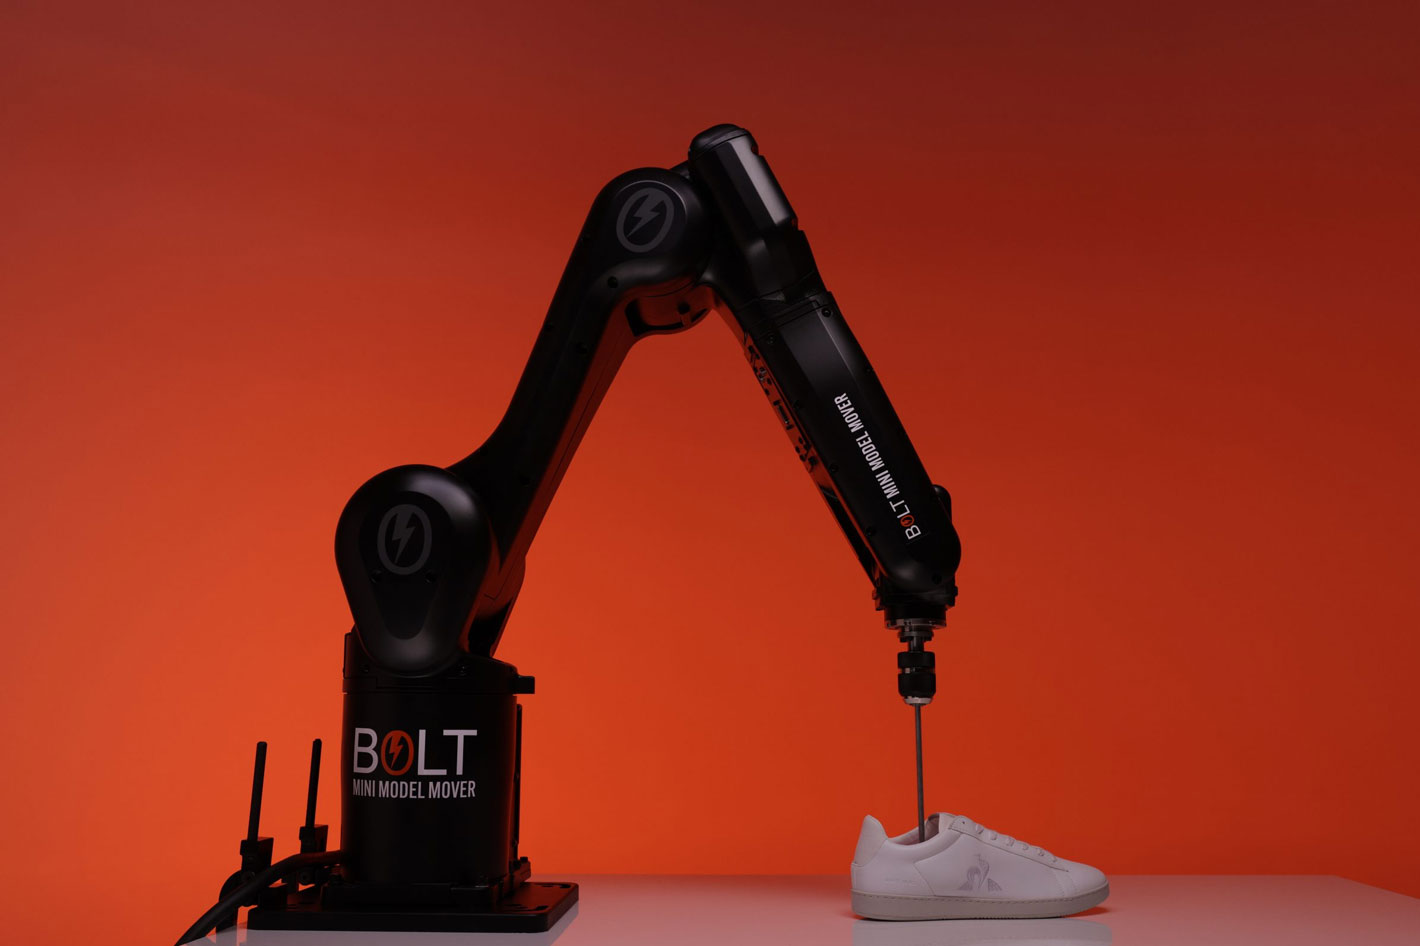 Bolt Mini Model Mover: the smallest robotic arm from MRMC